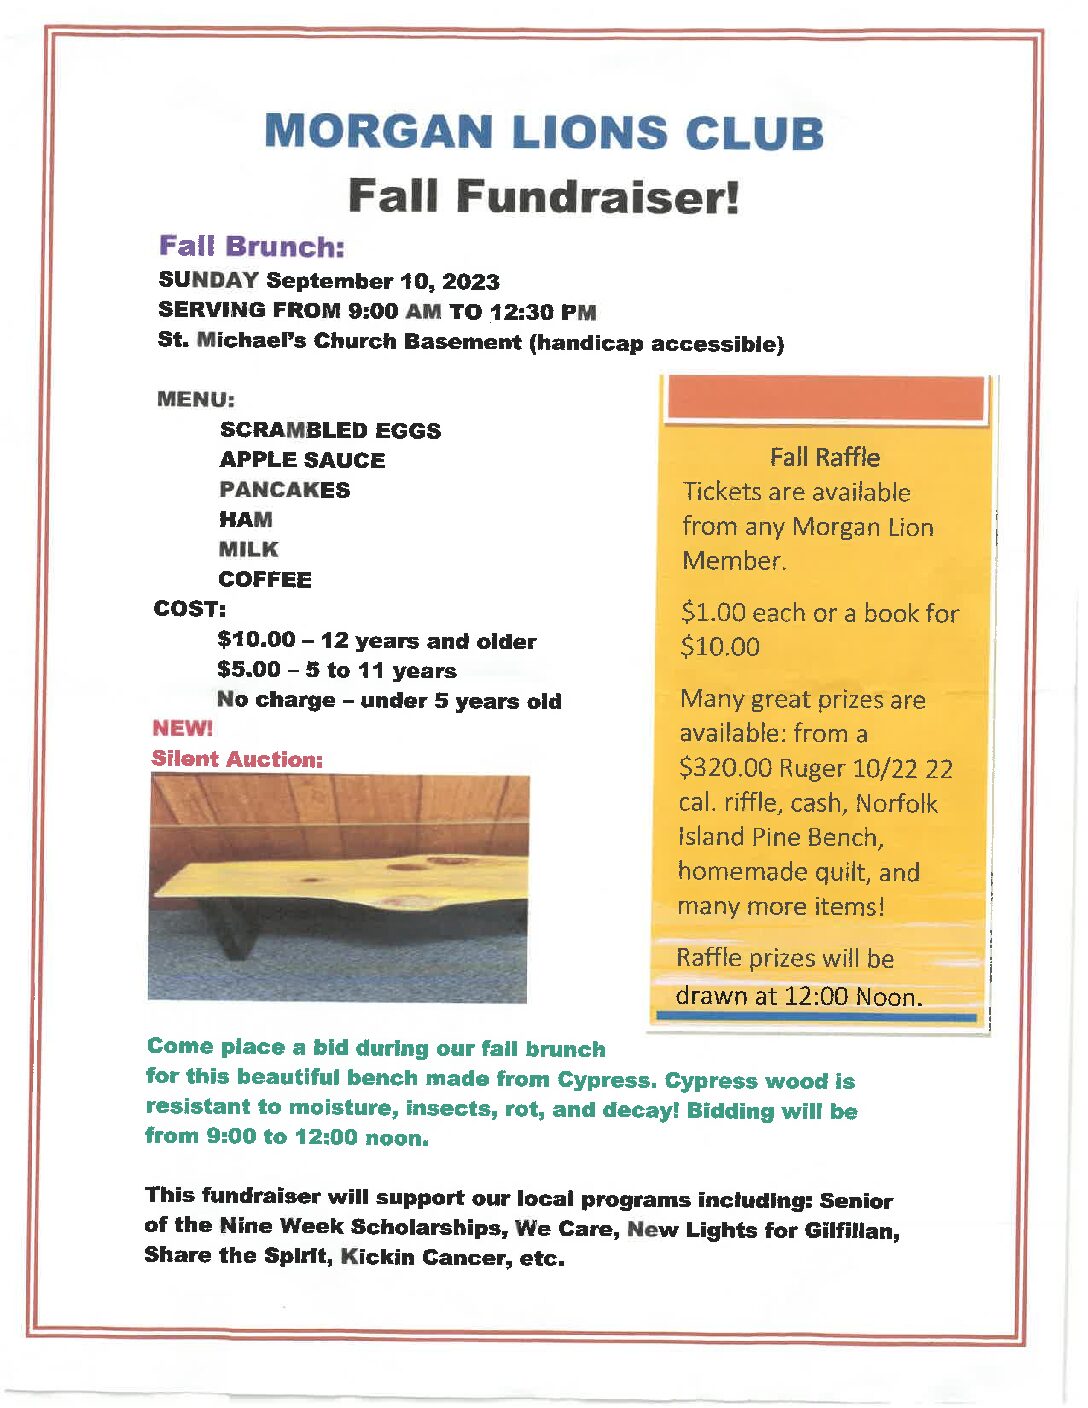 <h1 class="tribe-events-single-event-title">Morgan Lions Club Fall Fundraiser</h1>